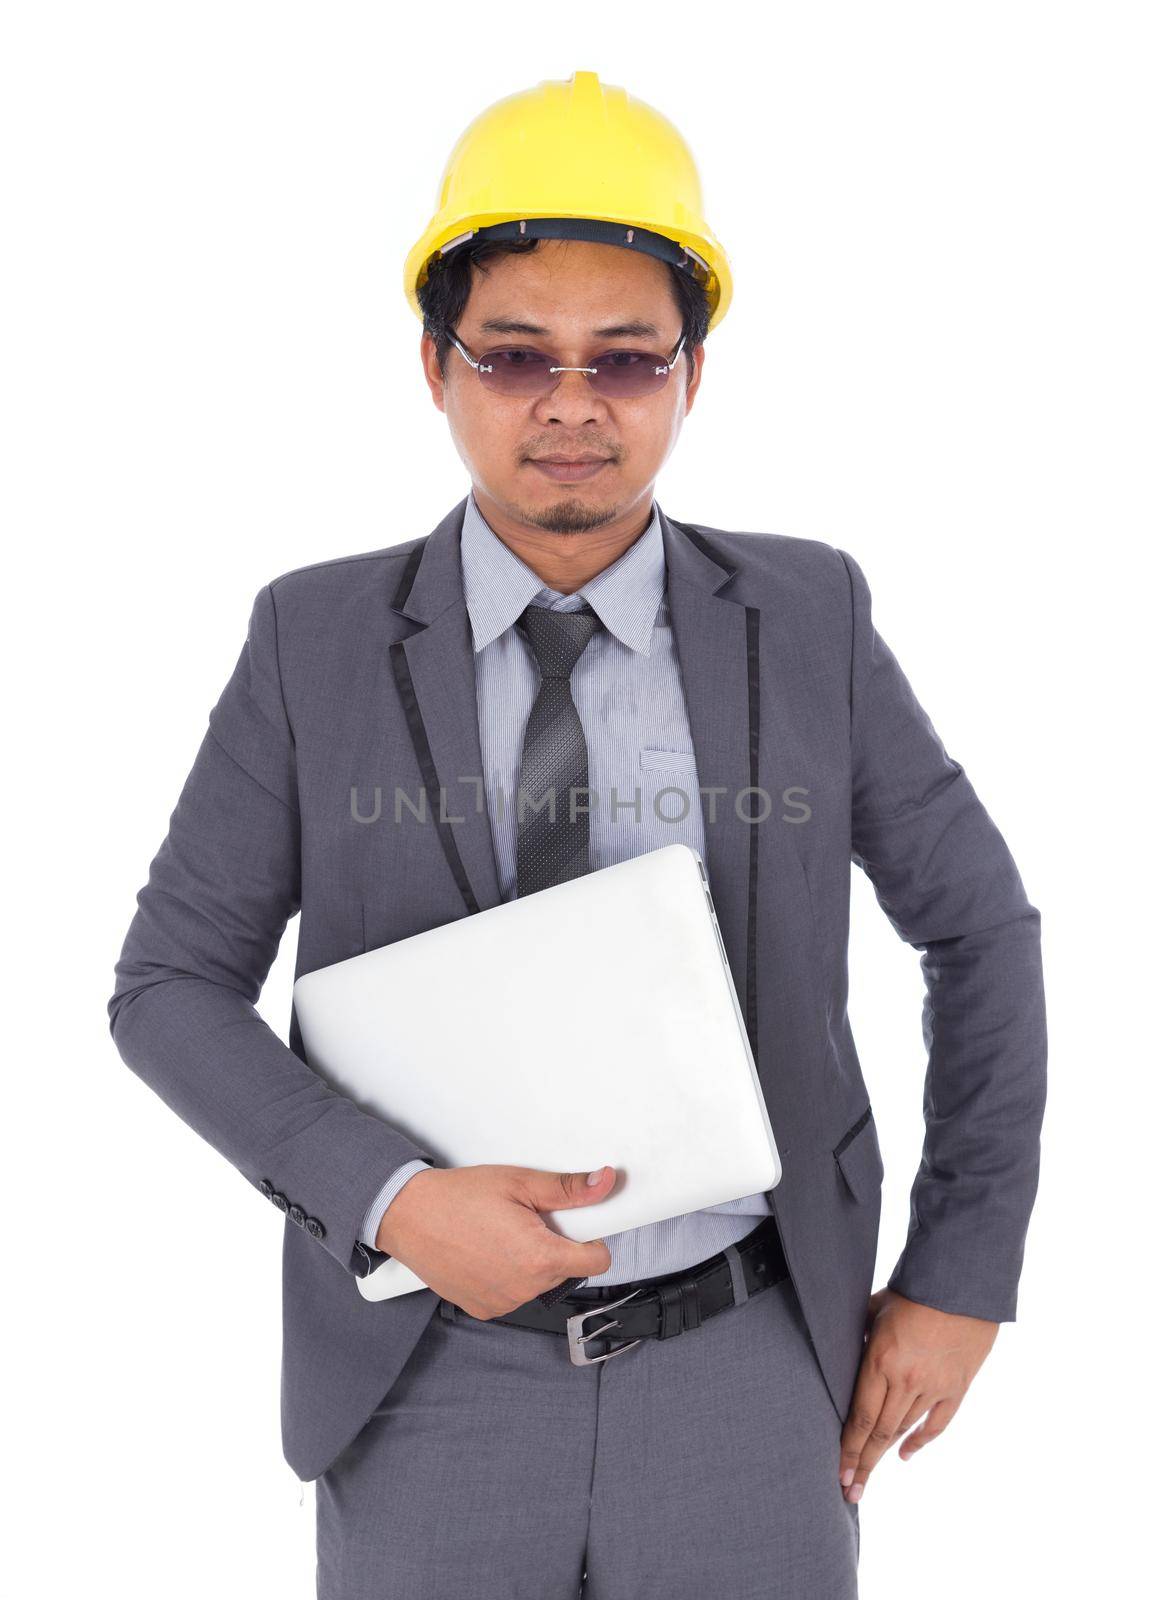 engineer holding laptop isolated on white background by geargodz